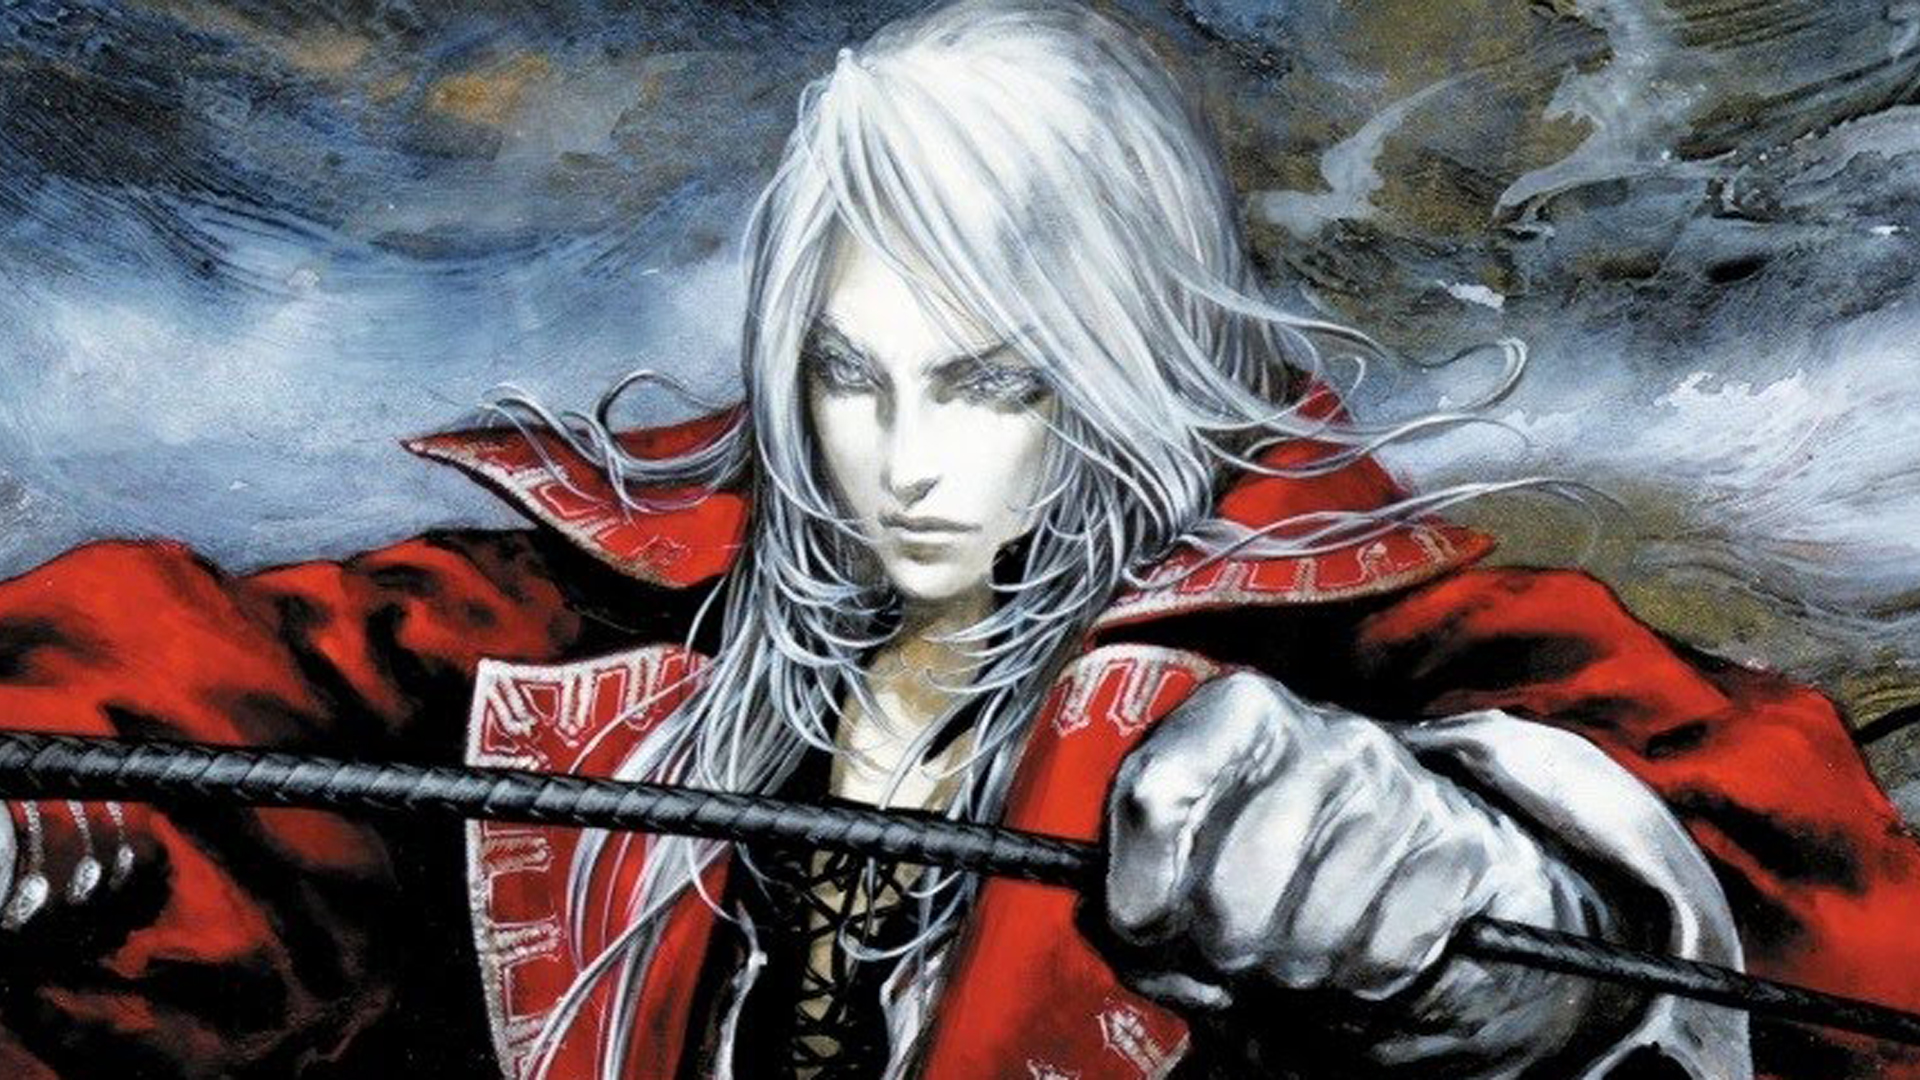 Castlevania Advance Collection may be coming to PC